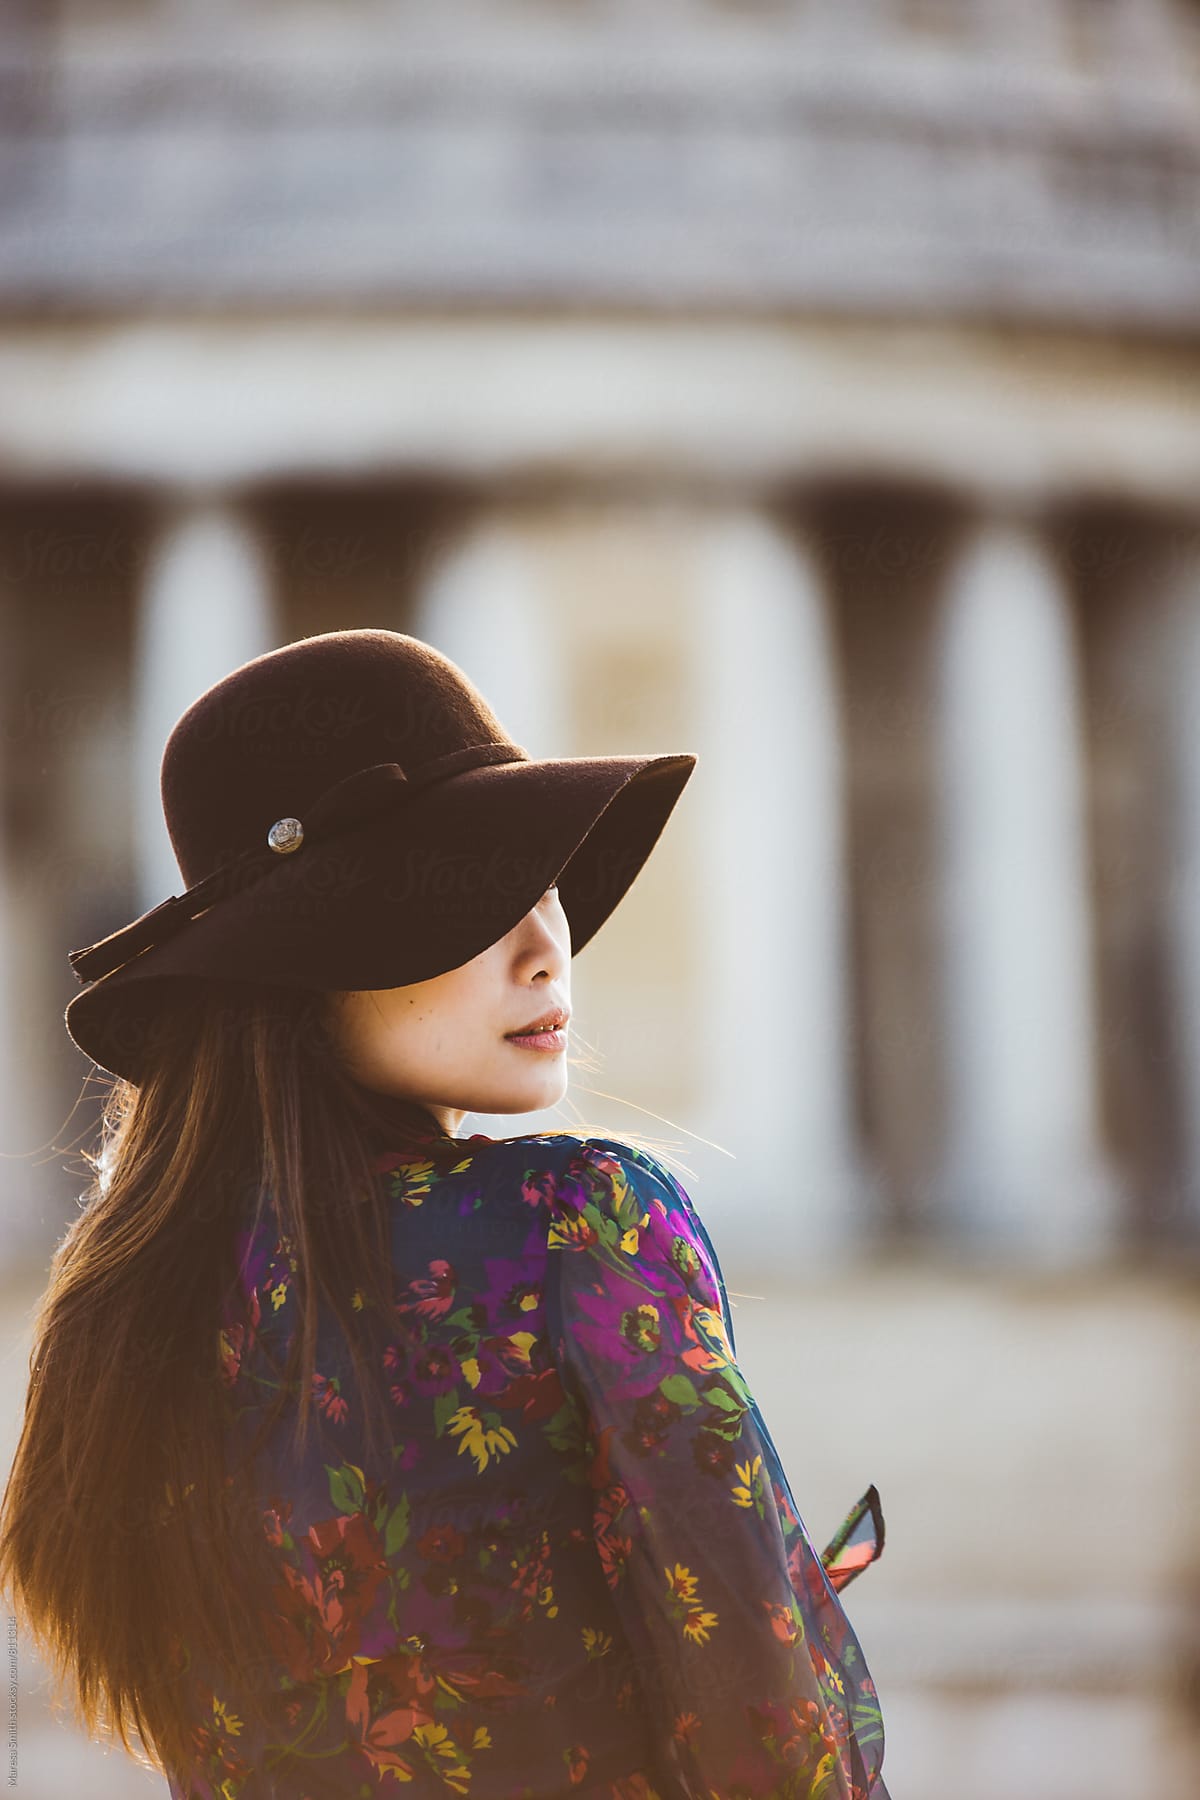 Profile of an asian girl wearing a floppy hat with a blurred building in the background